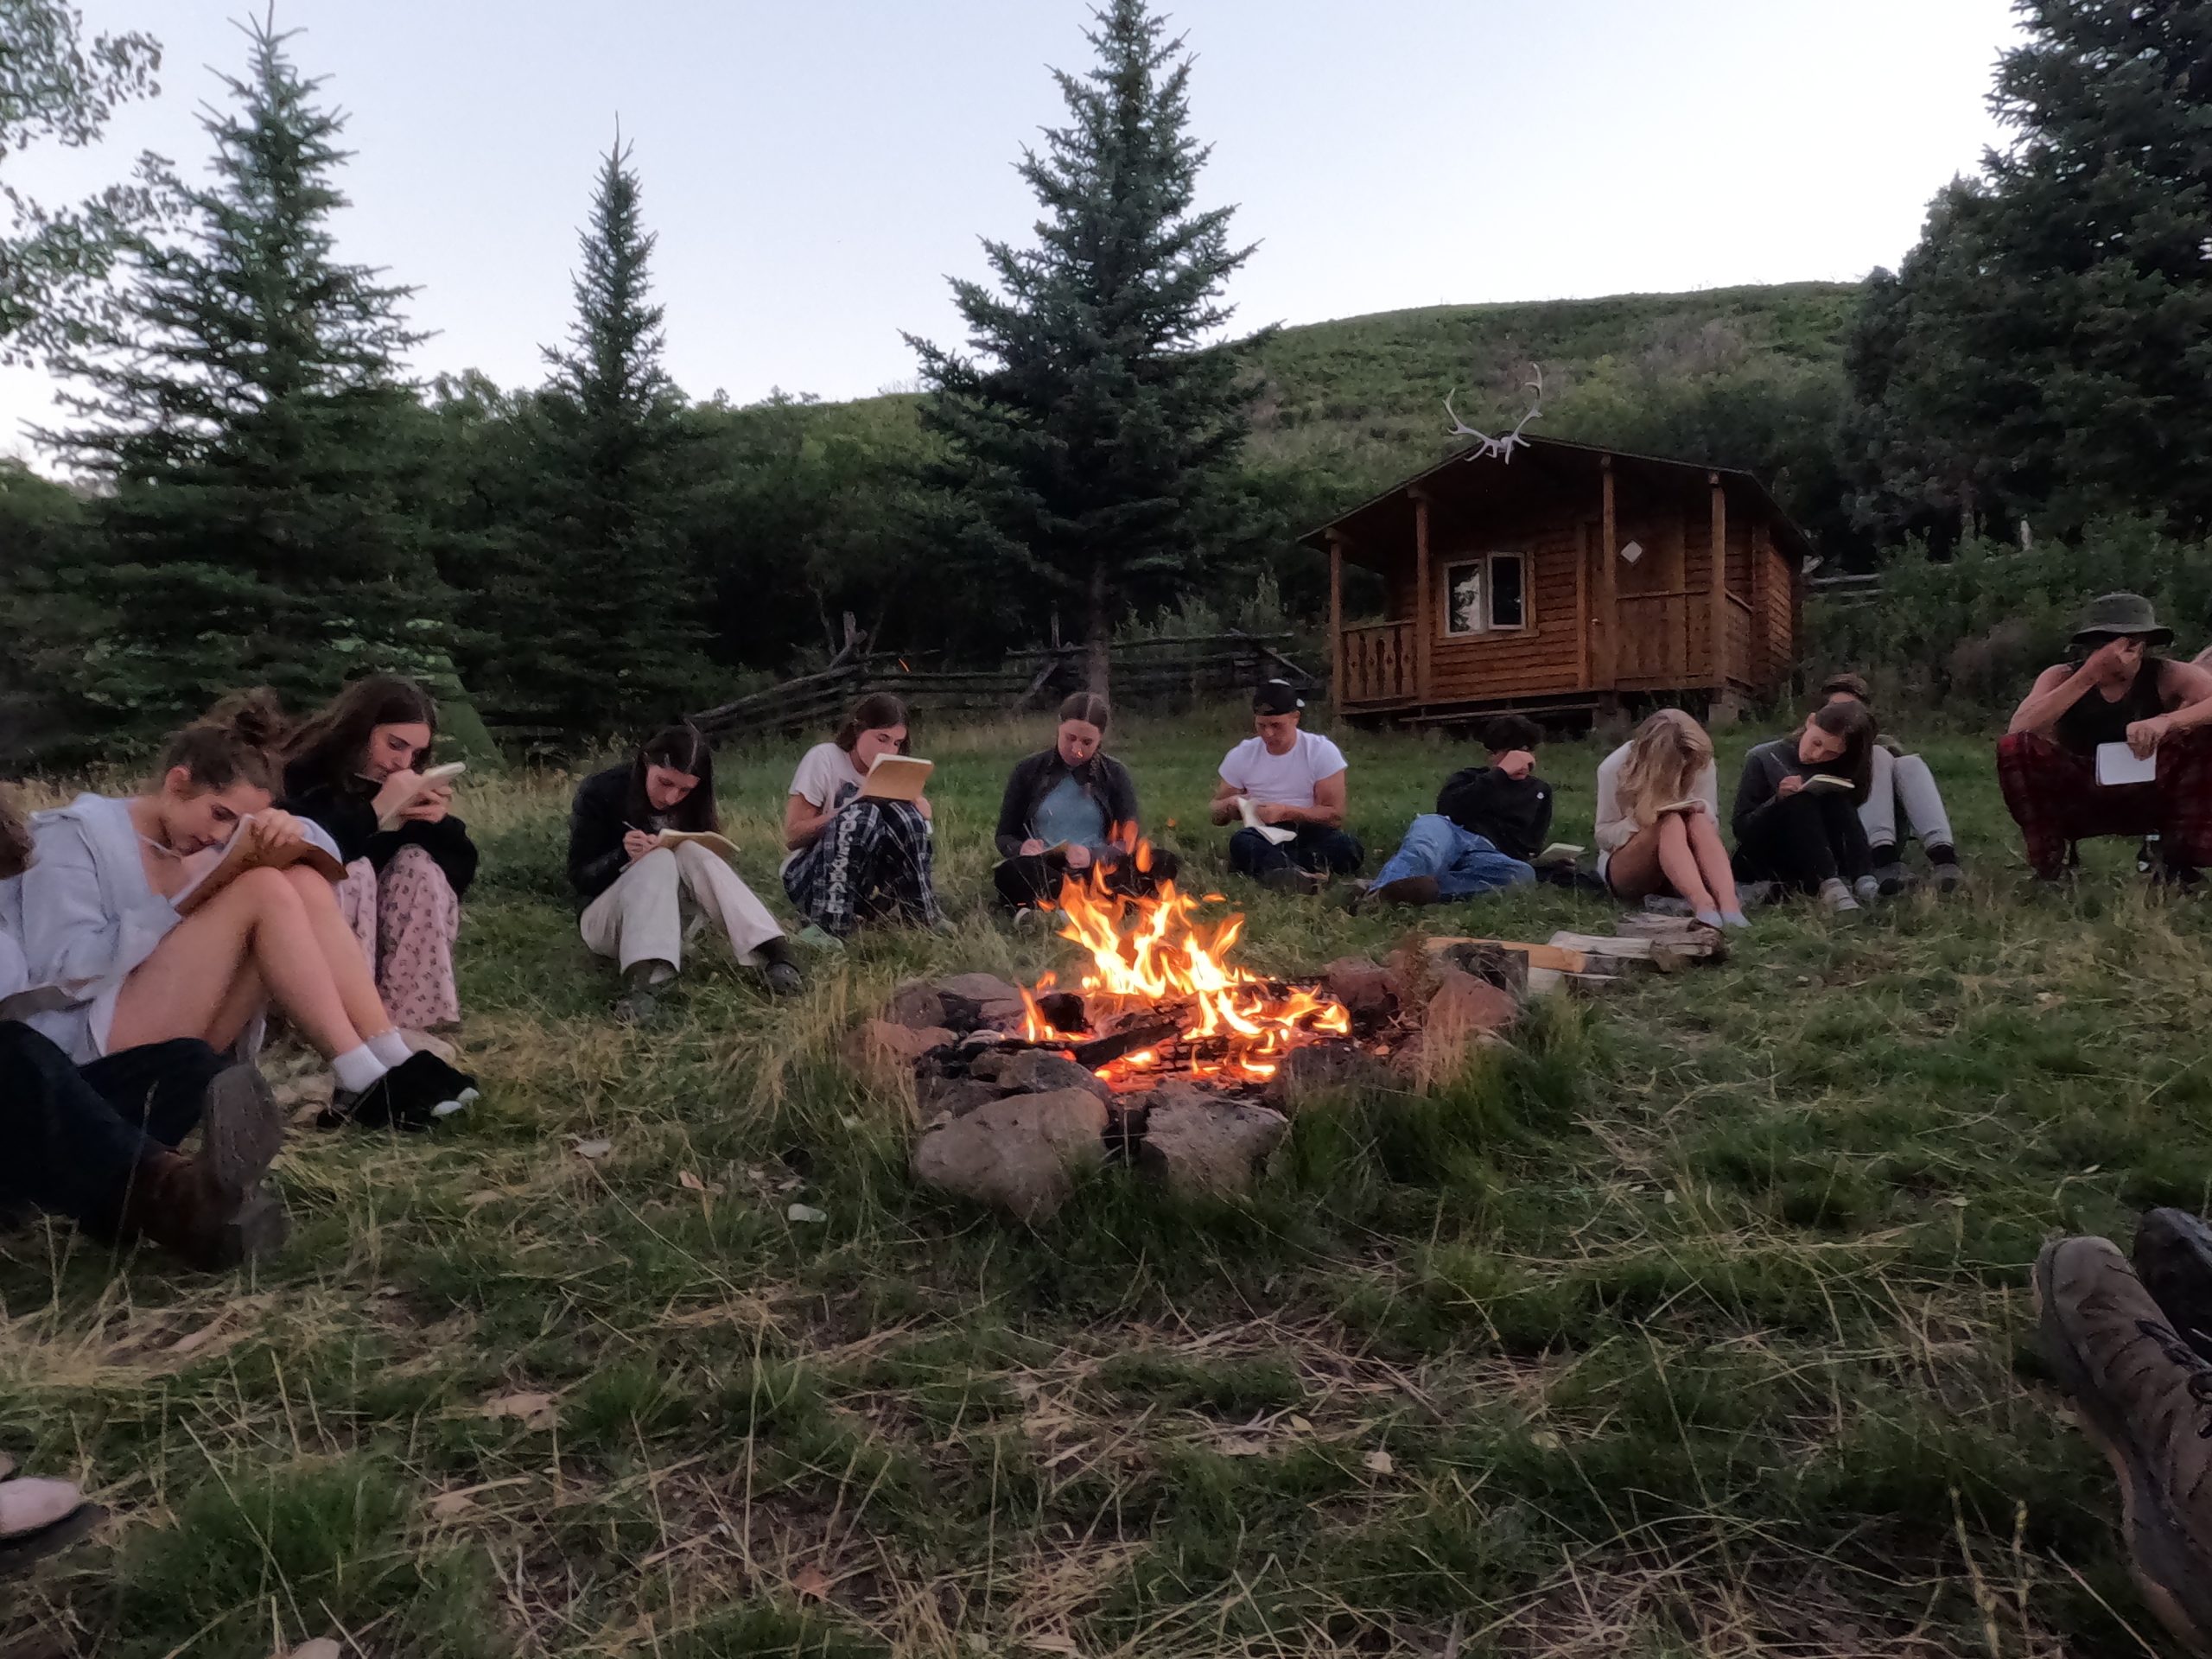 AHS Students gathered around the campfire journaling during the Bair Ranch Ex-Ed program.